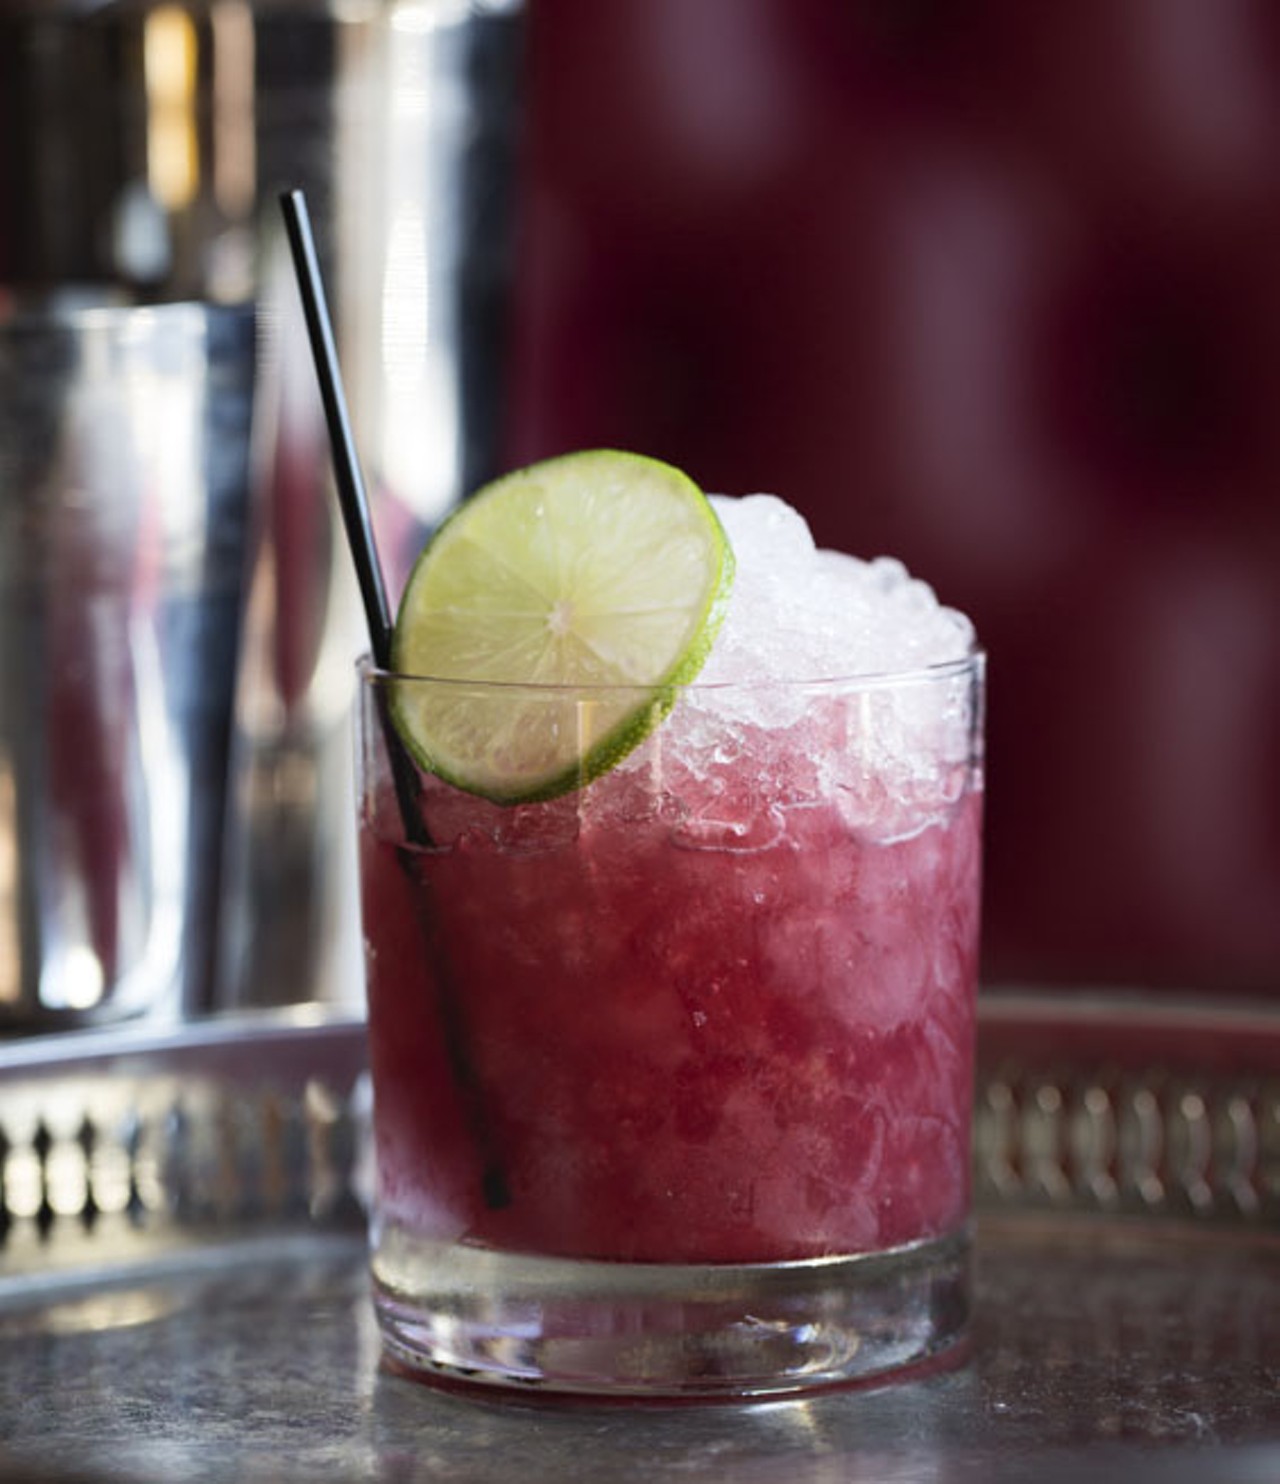 The "Bramble On" is chipotle-infused mezcal, Byrrh, blackberry syrup, lime and Dale's Pimento Bitters.